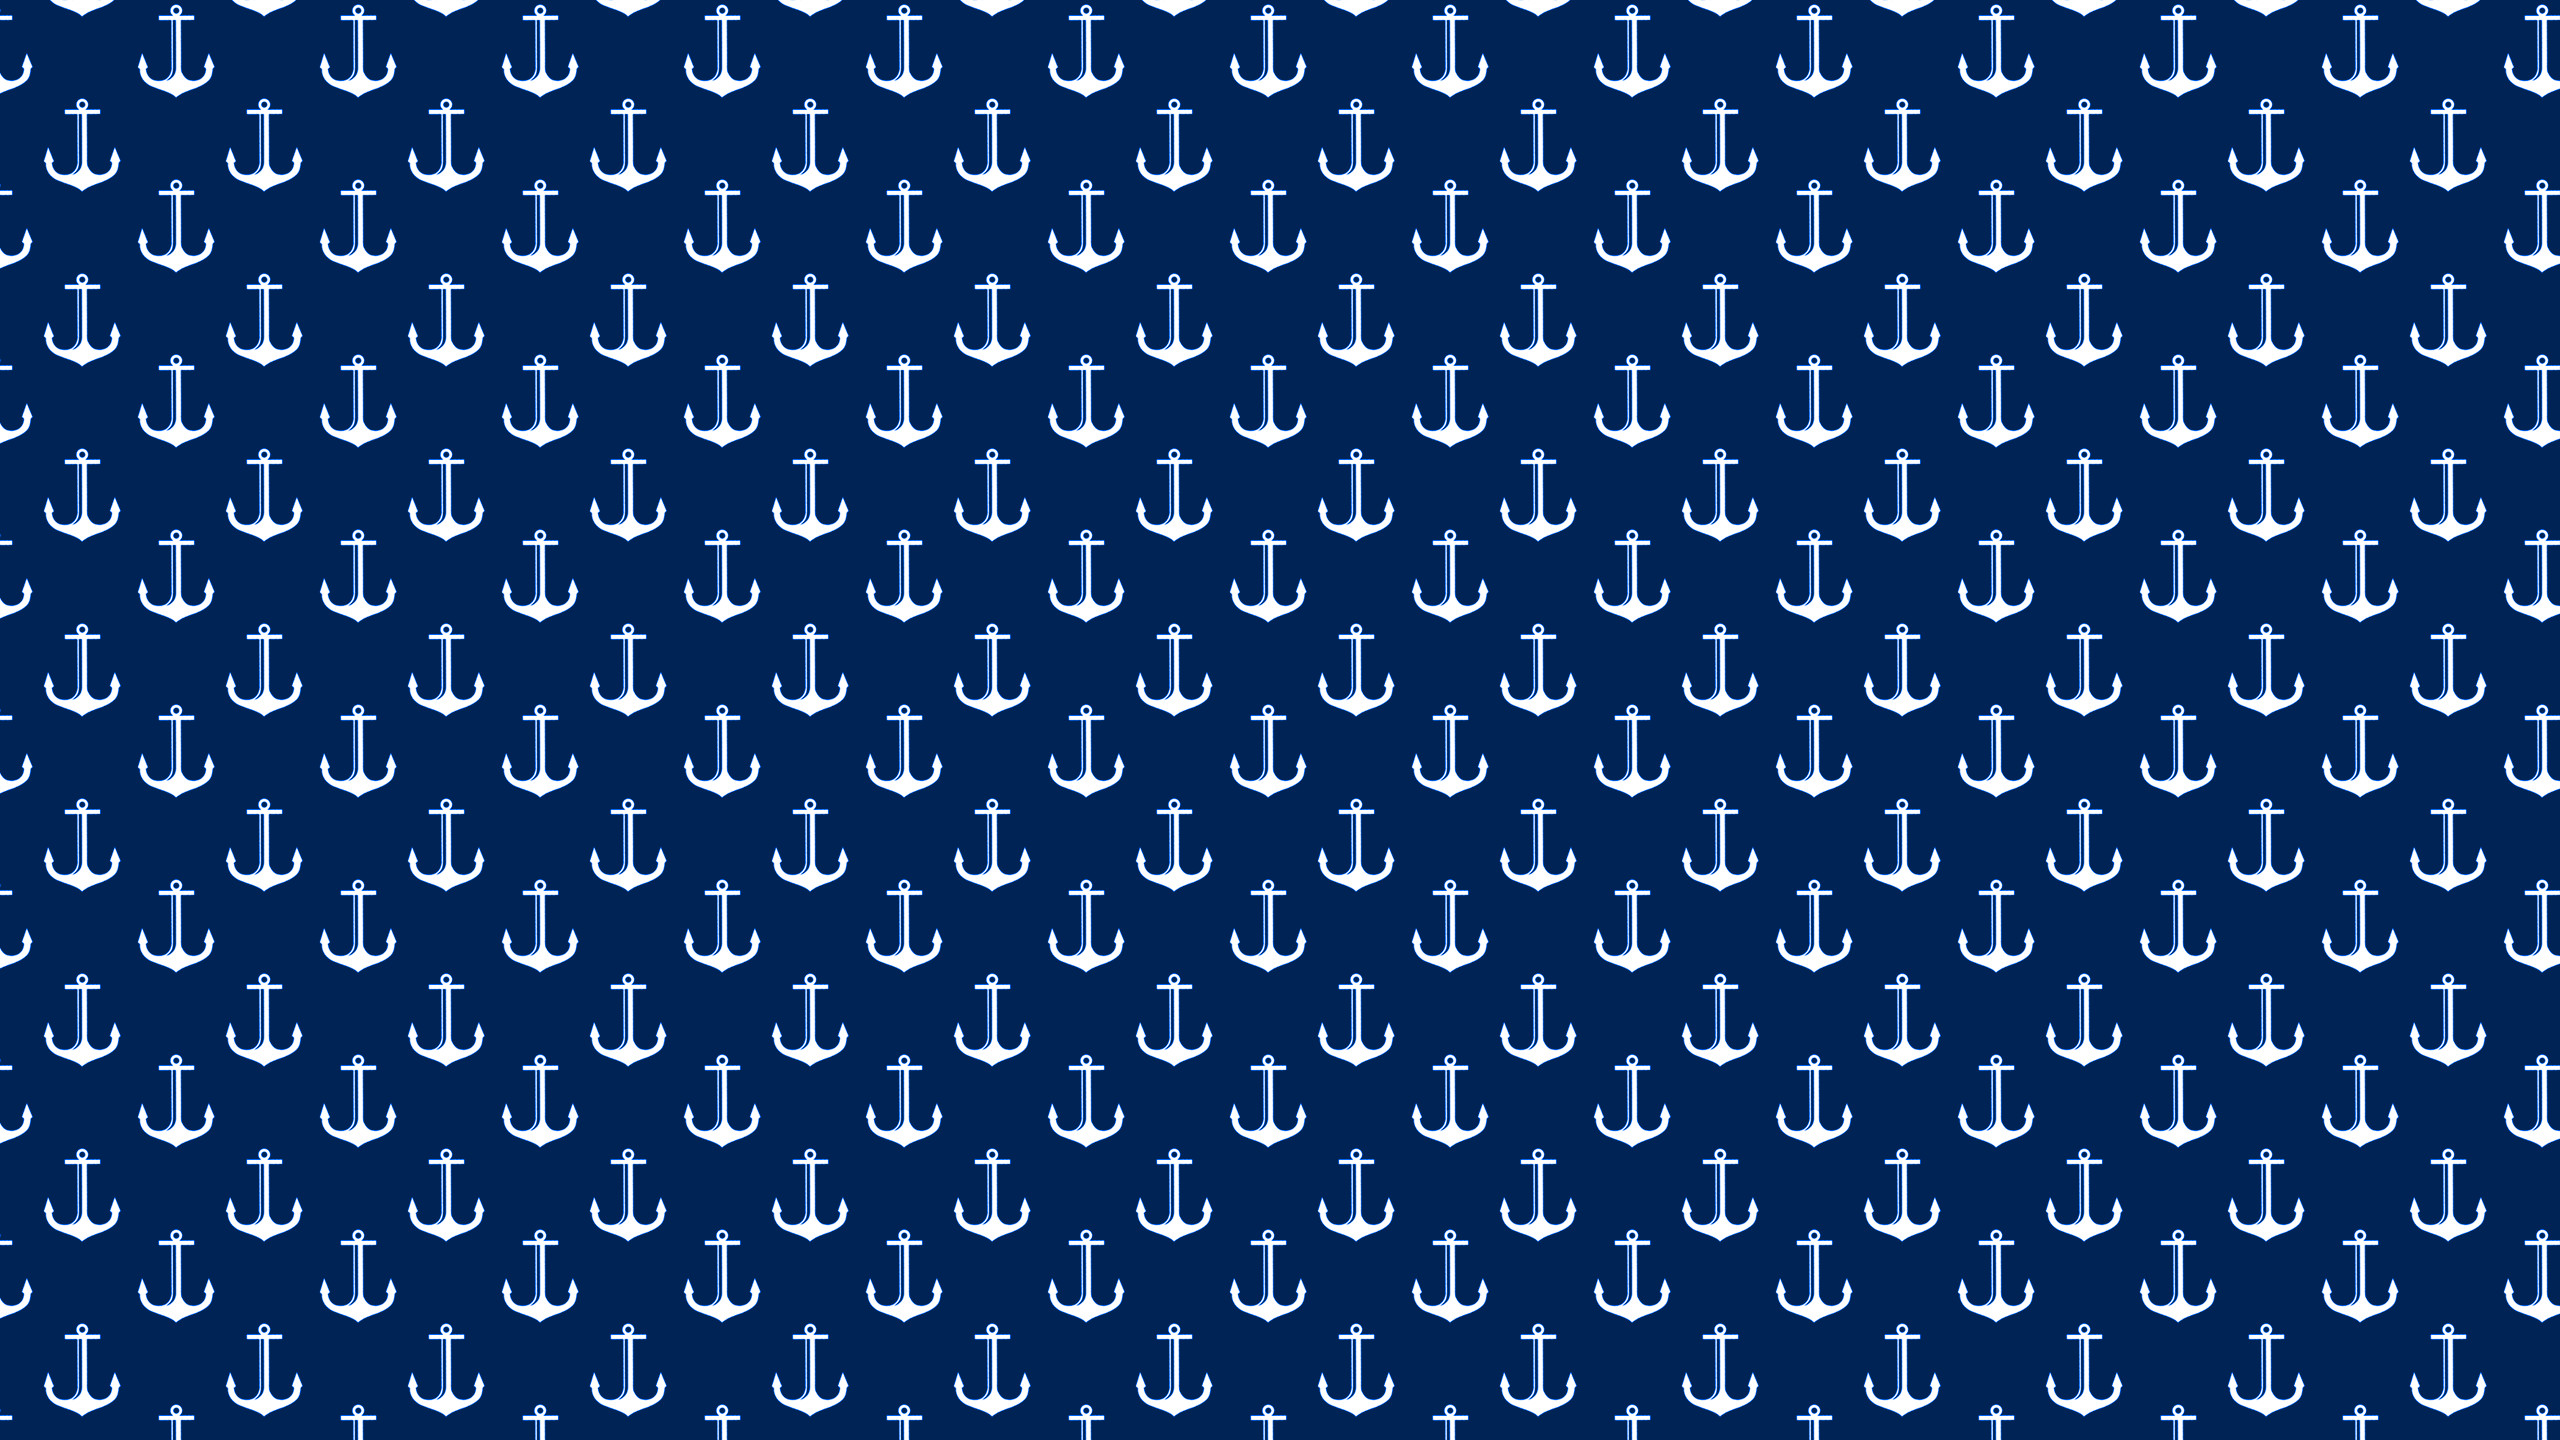 Navy Blue Anchors Desktop Wallpaper is easy. Just save the wallpaper